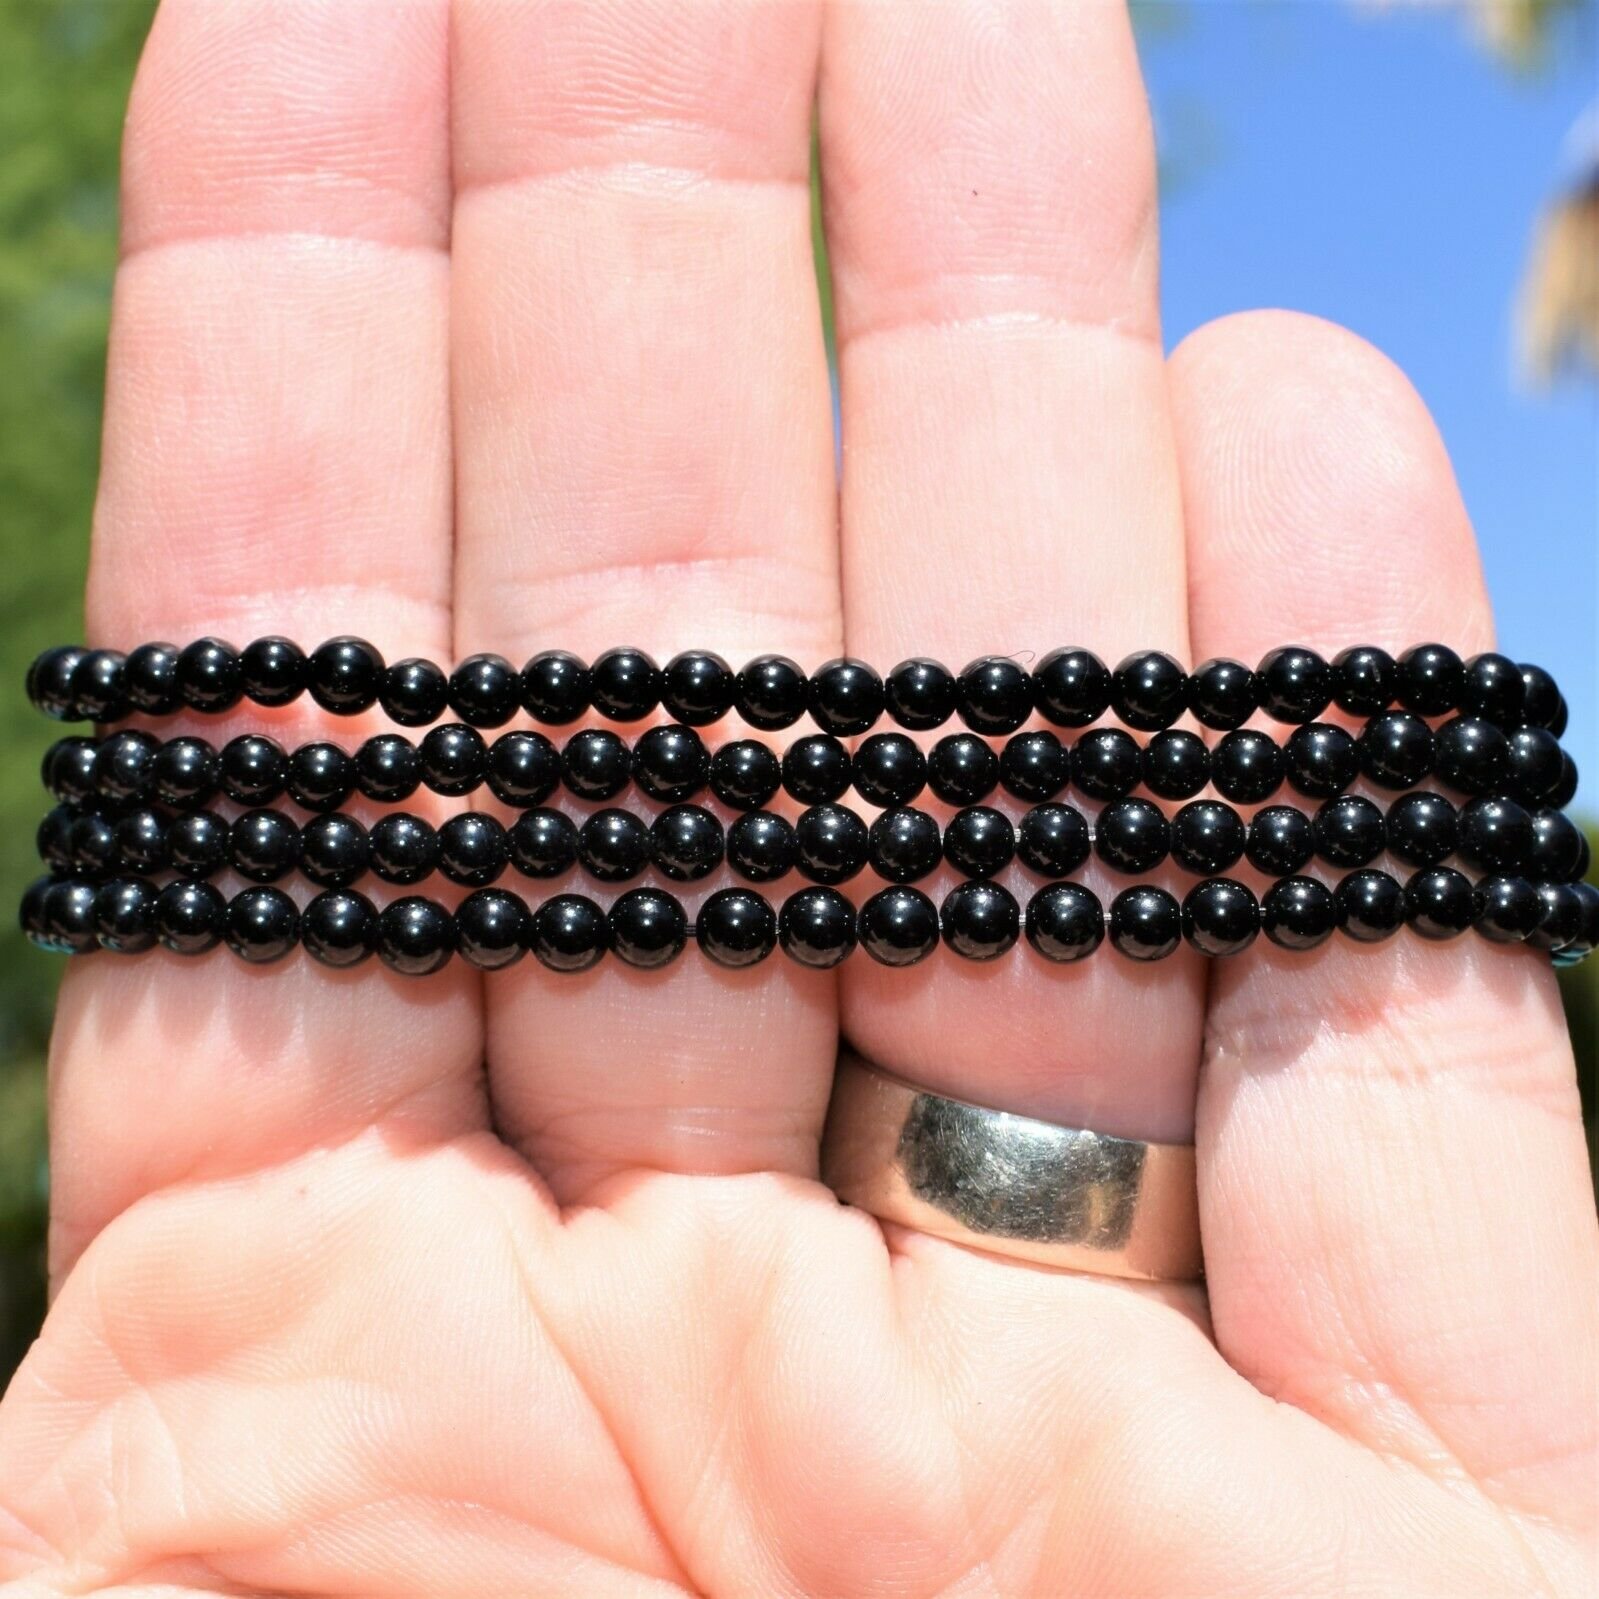 thumbnail 17  - Selenite Charged Black Tourmaline Crystal 4mm Bead Bracelet (other choices)